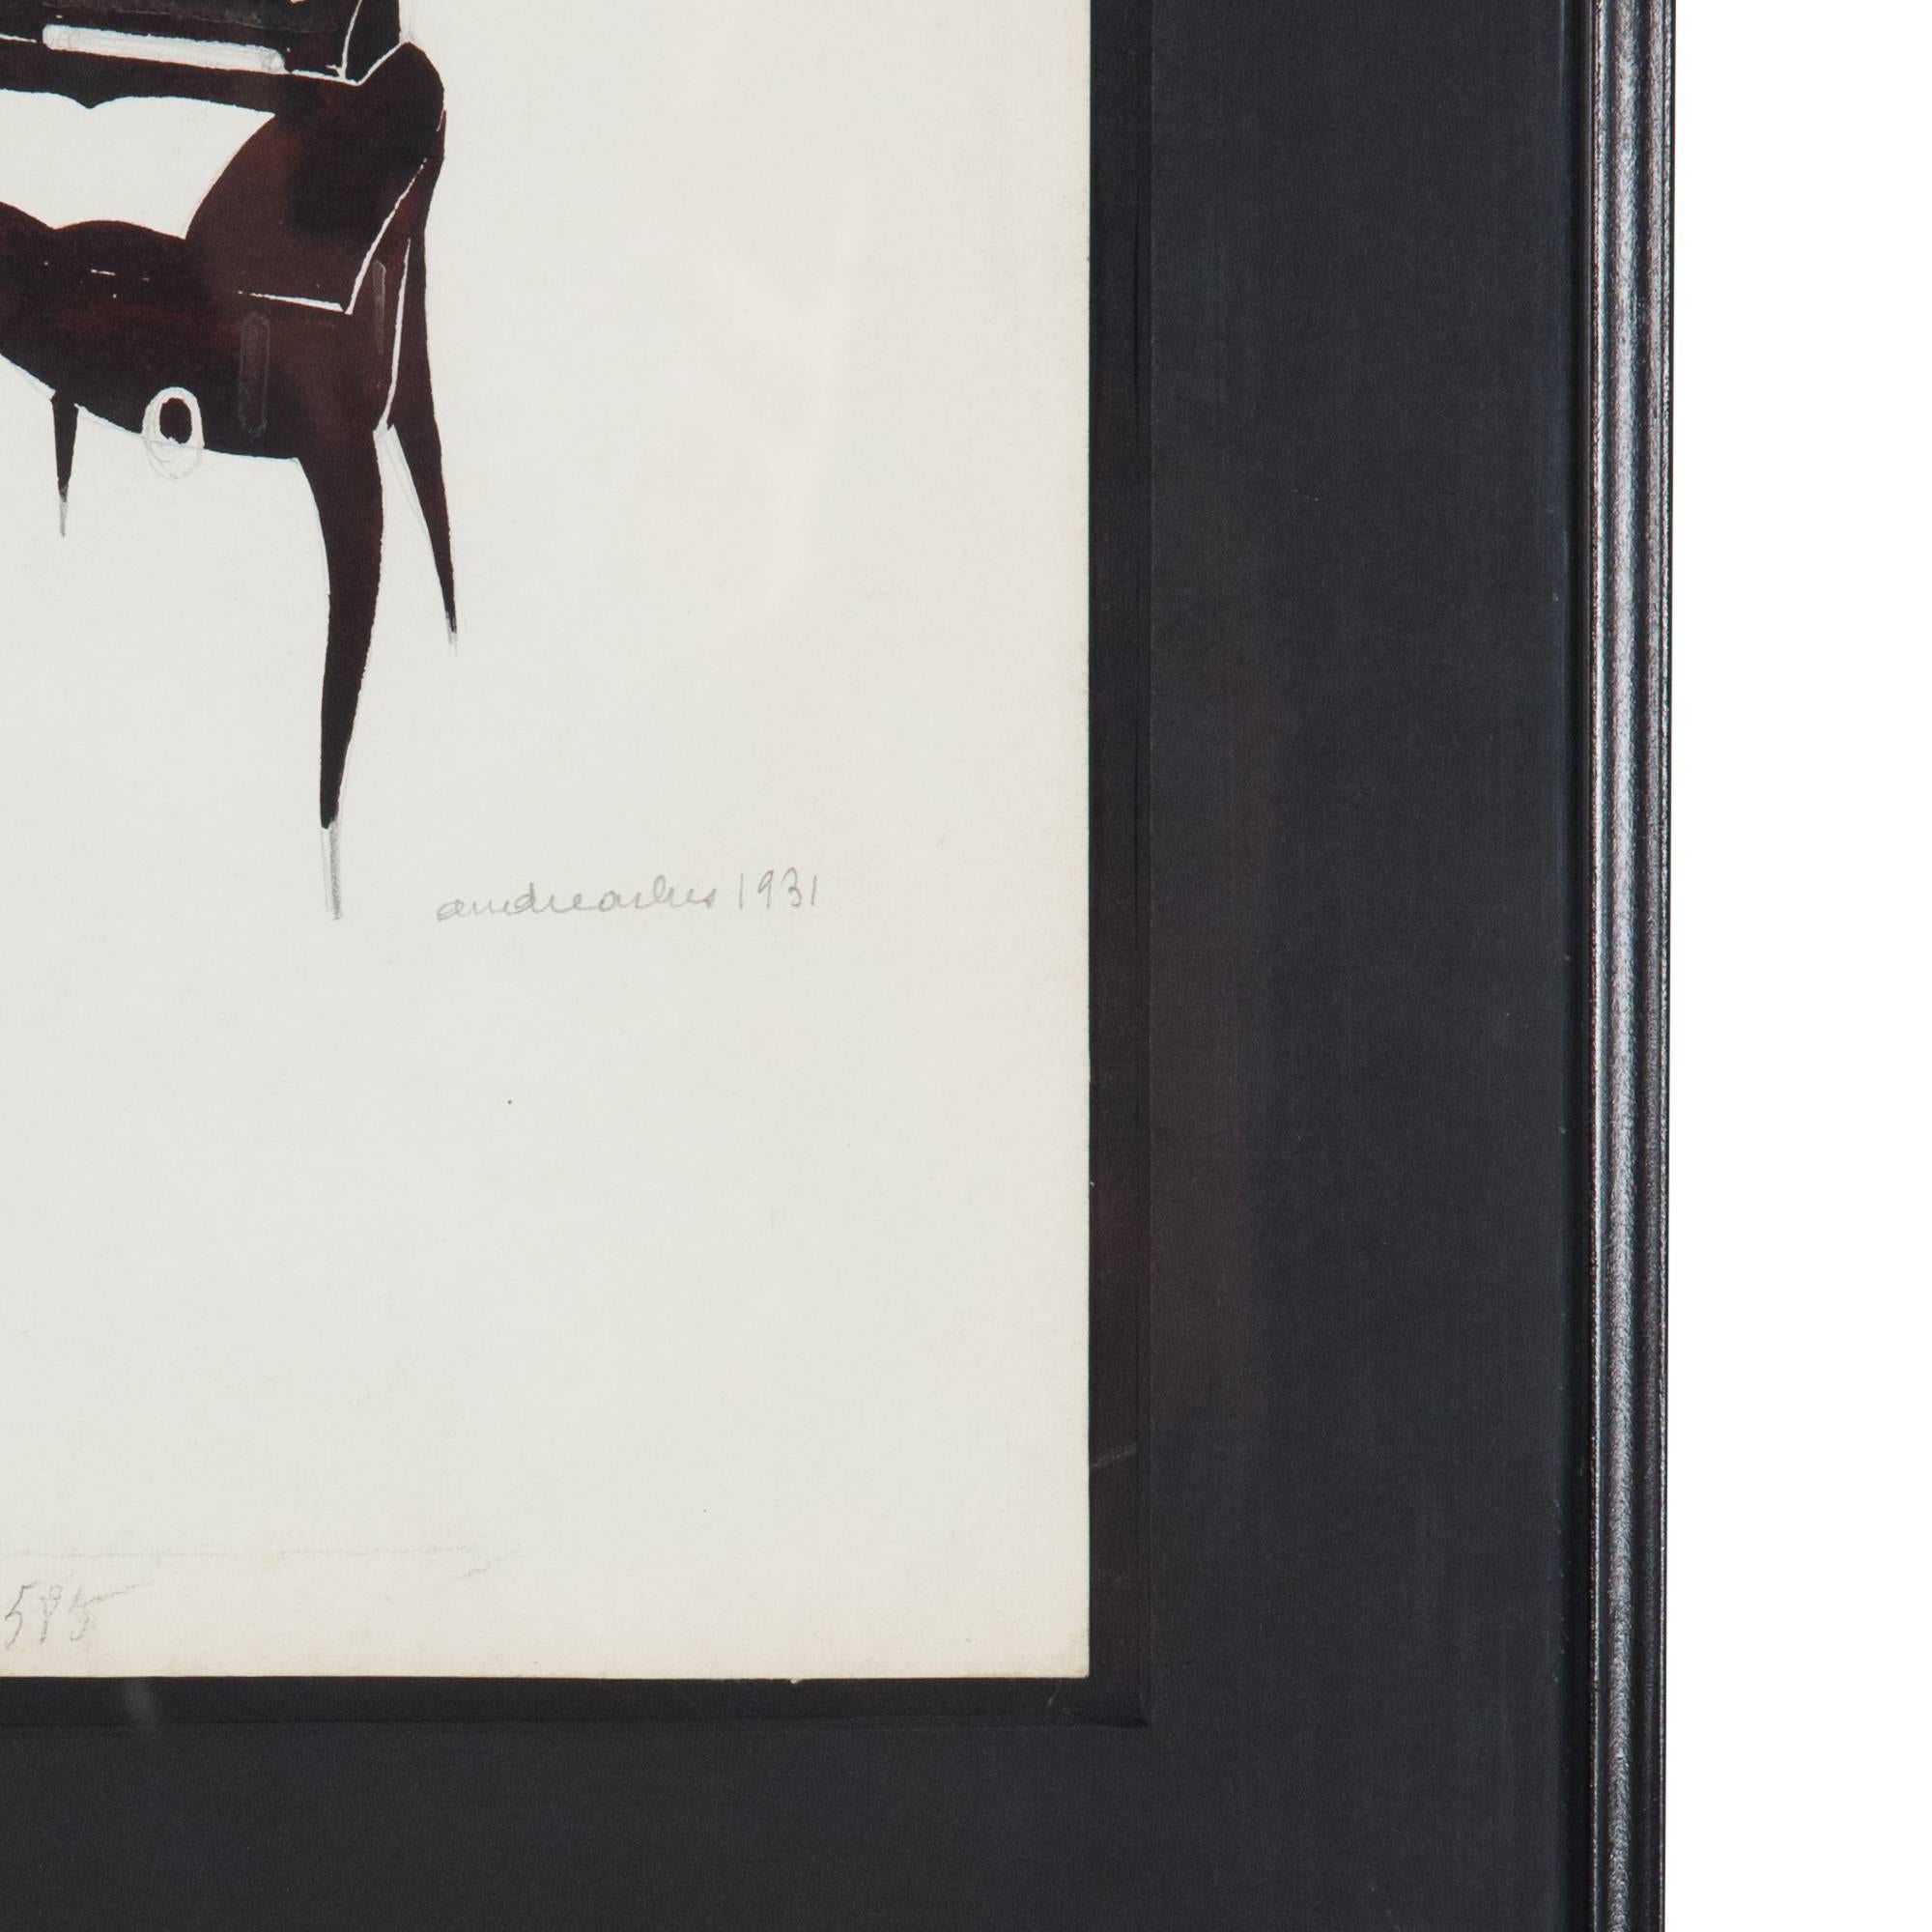 Ink and watercolor on paper, A Secretary, by Andre Arbus, France, 1931. Signed and dated. Framed height 17 1/4 in, width 13 3/4 in, depth 1 1/4 in. (sats)